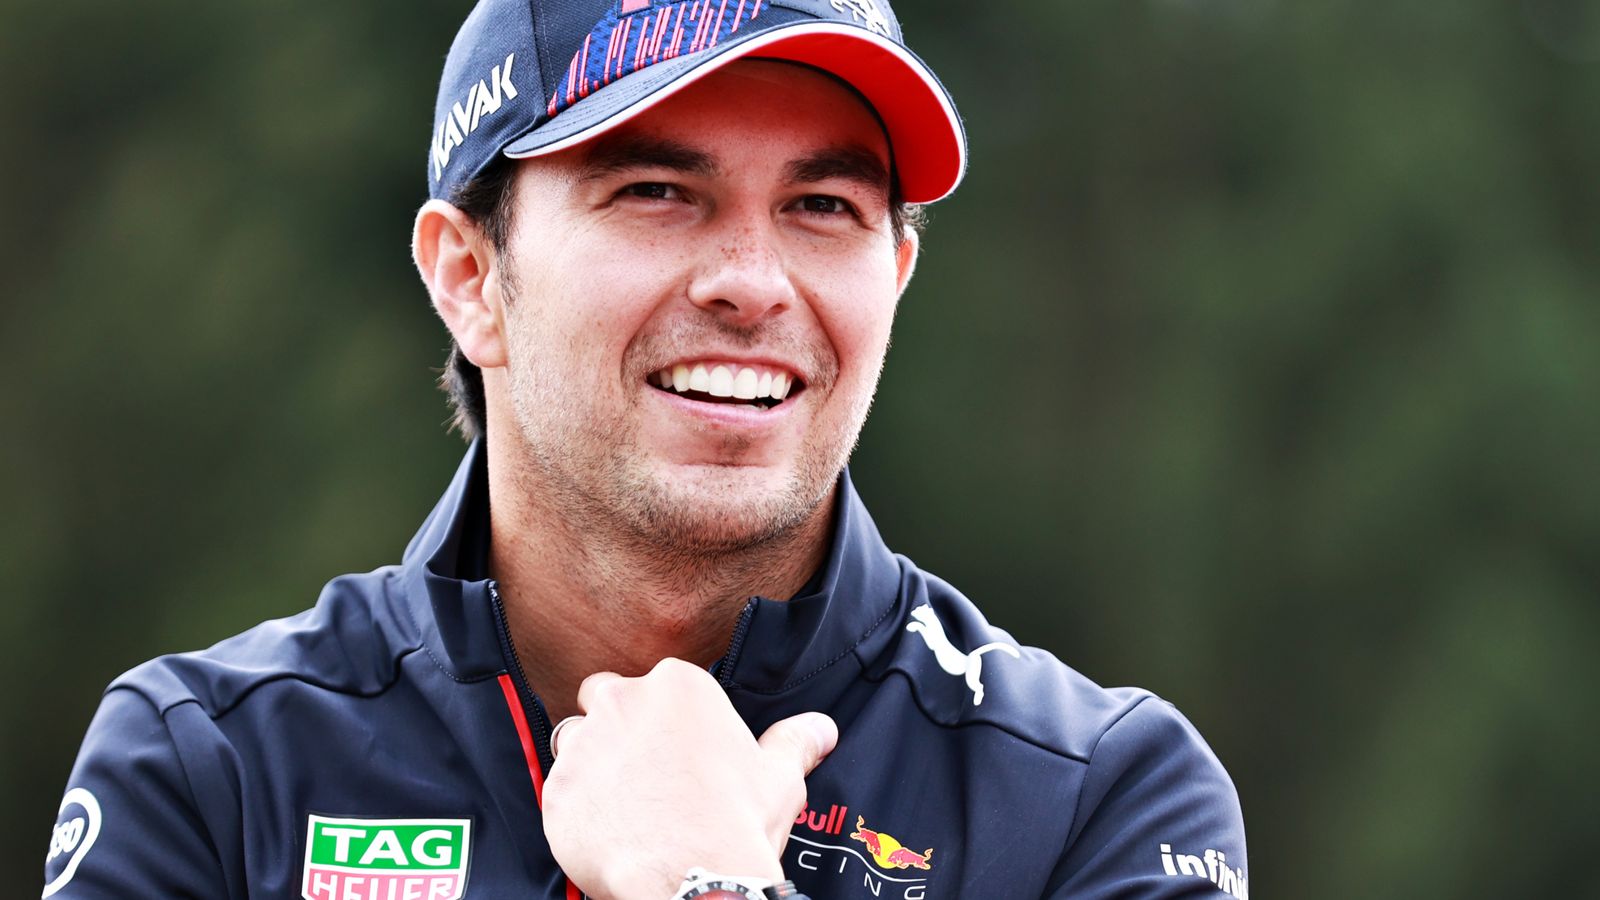 Sergio Perez confirmed as Max Verstappen's teammate for 2022 as Red